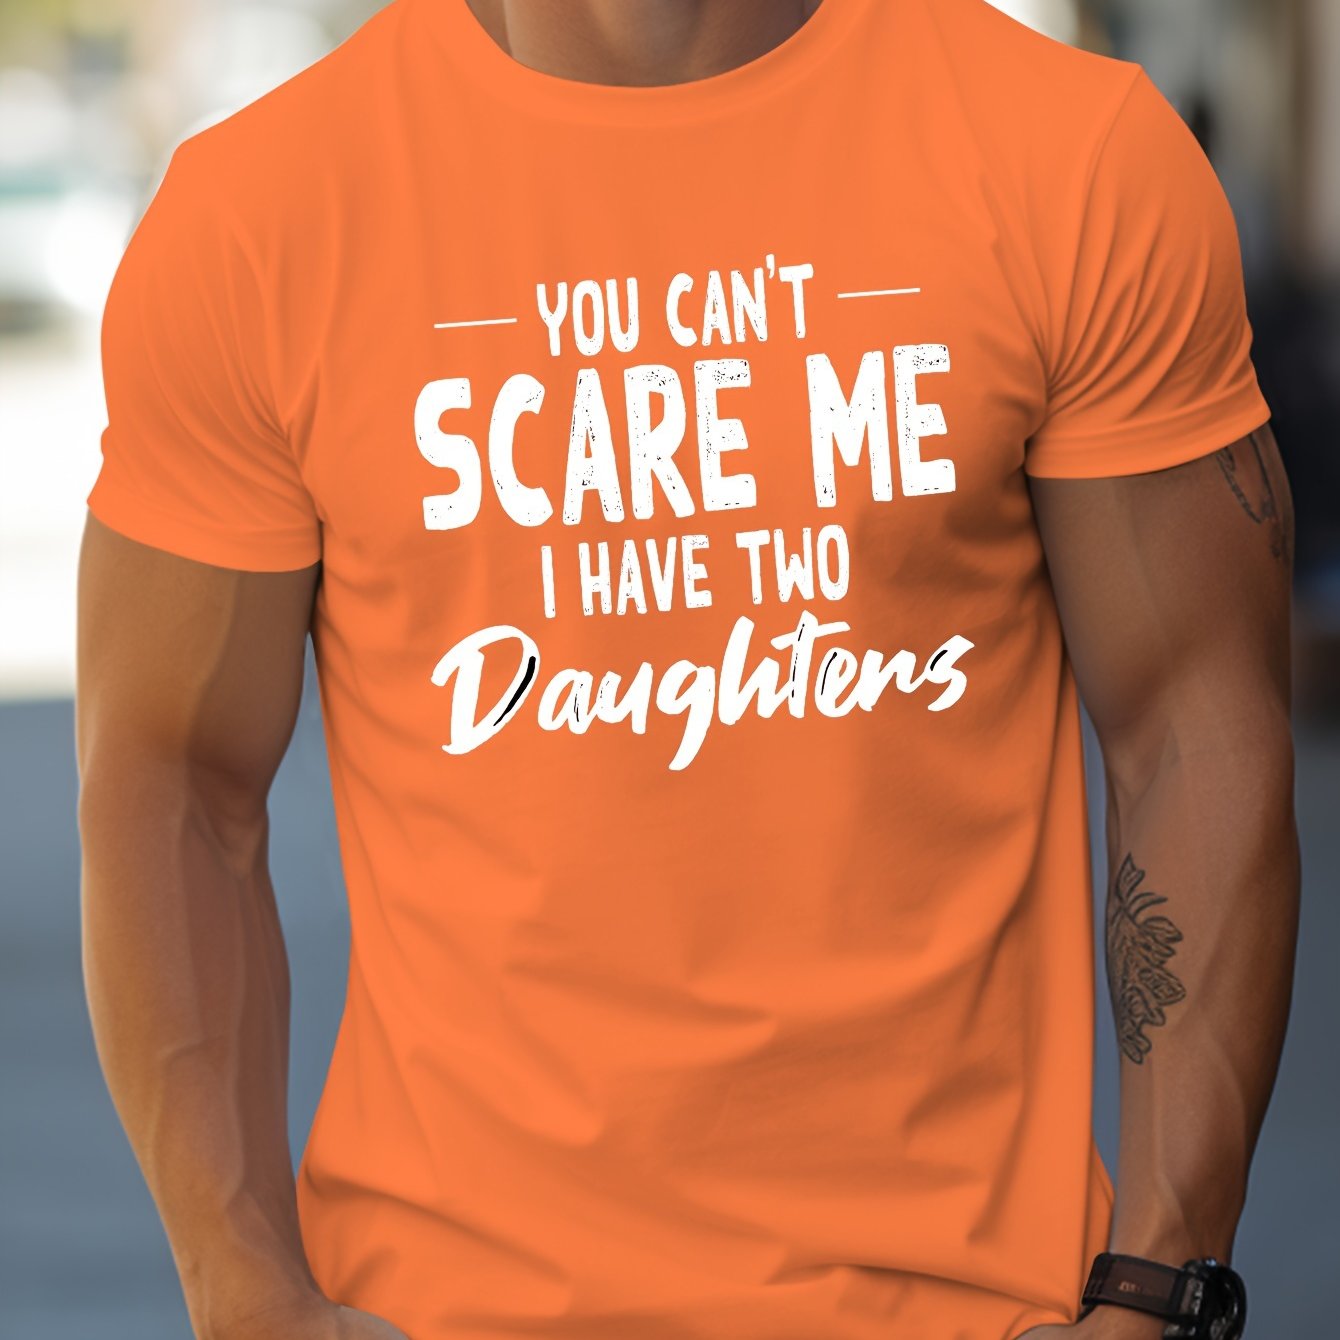 YOU CAN'T SCARE ME I HAVE TWO DAUGHTERS Print, Men's Novel Graphic Design T-shirt, Casual Comfy Tees For Summer, Men's Clothing Tops For Daily Activities